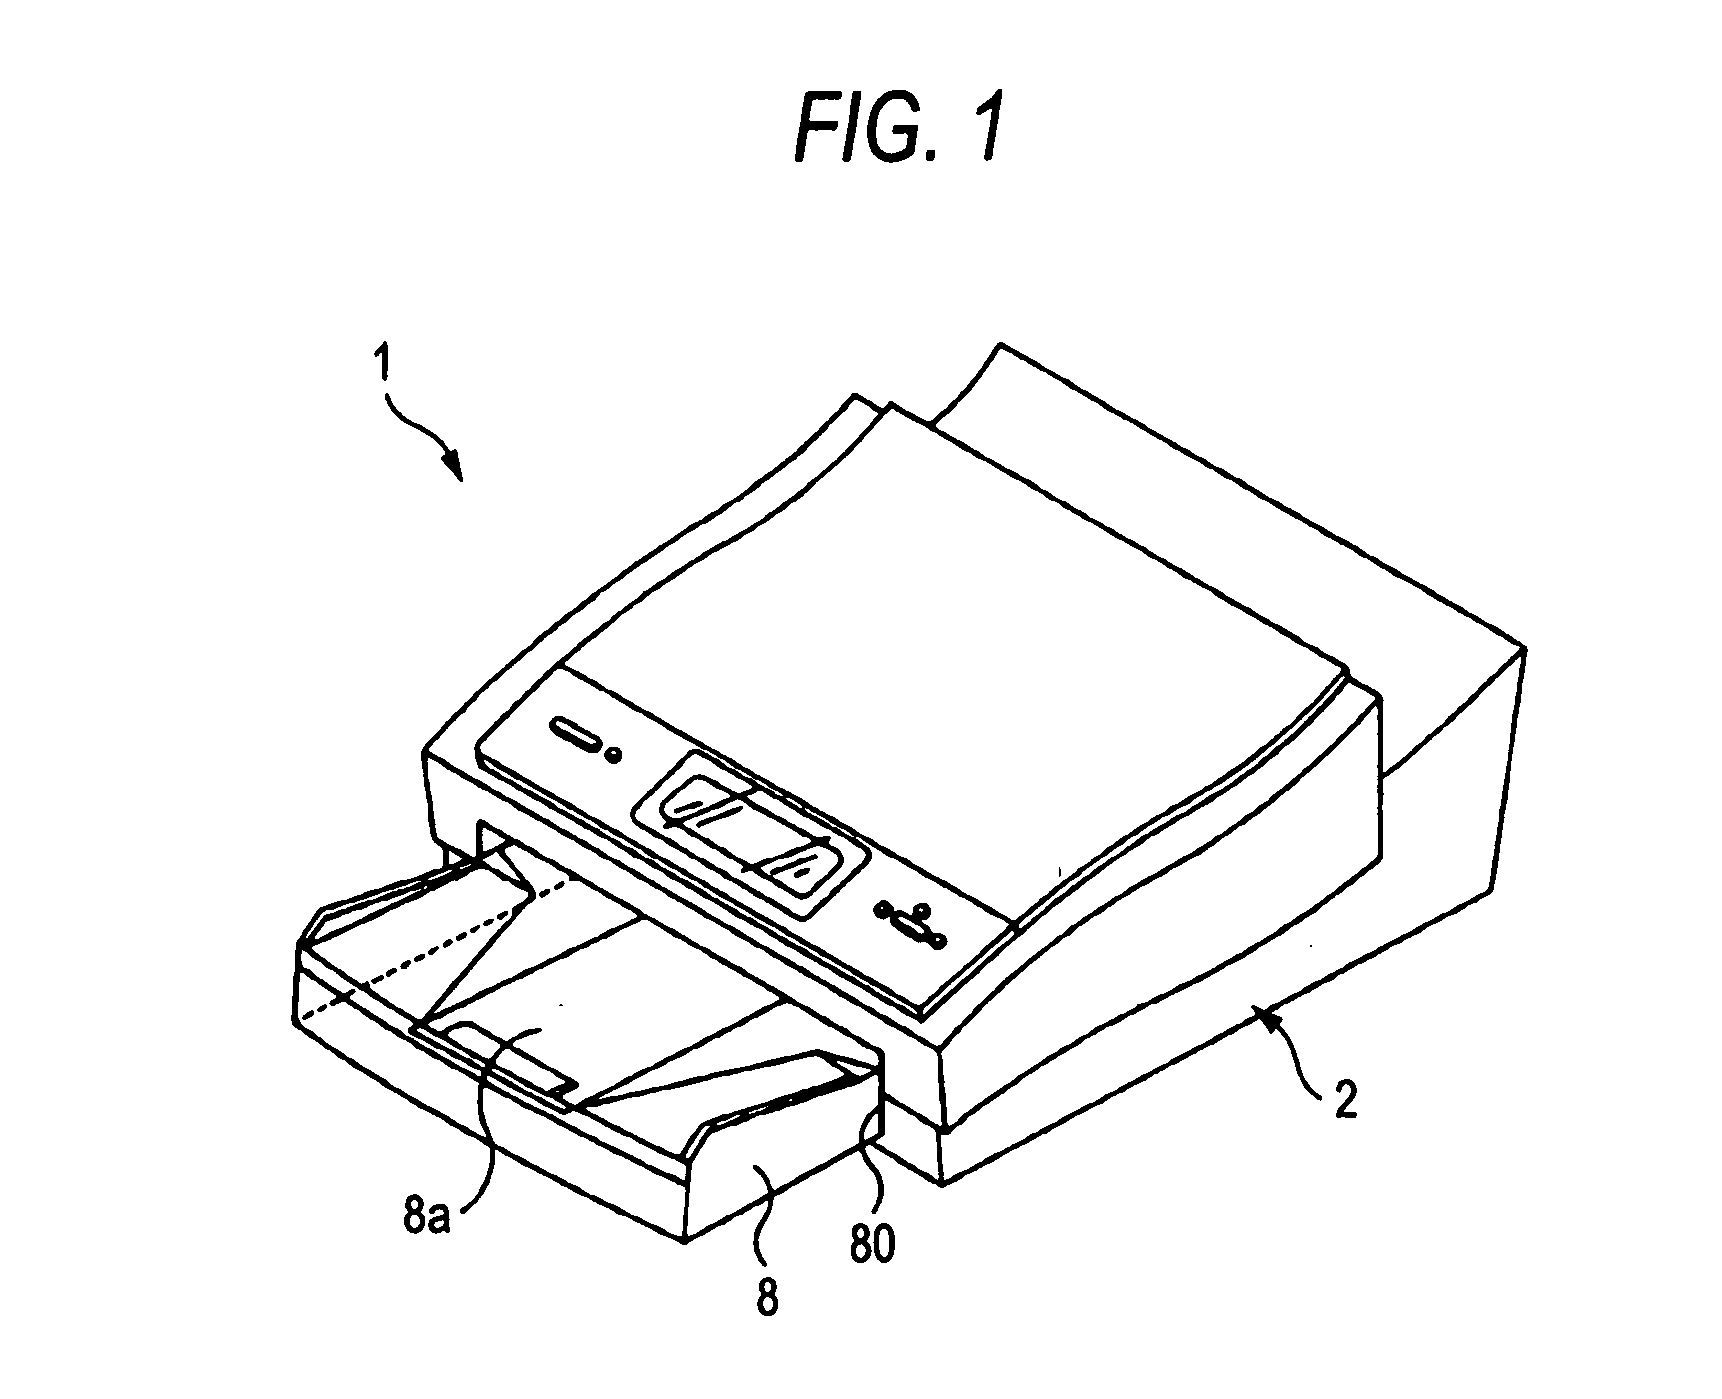 Cleaning blade, method fabricating cleaning blade, and cleaning apparatus for liquid discharge head